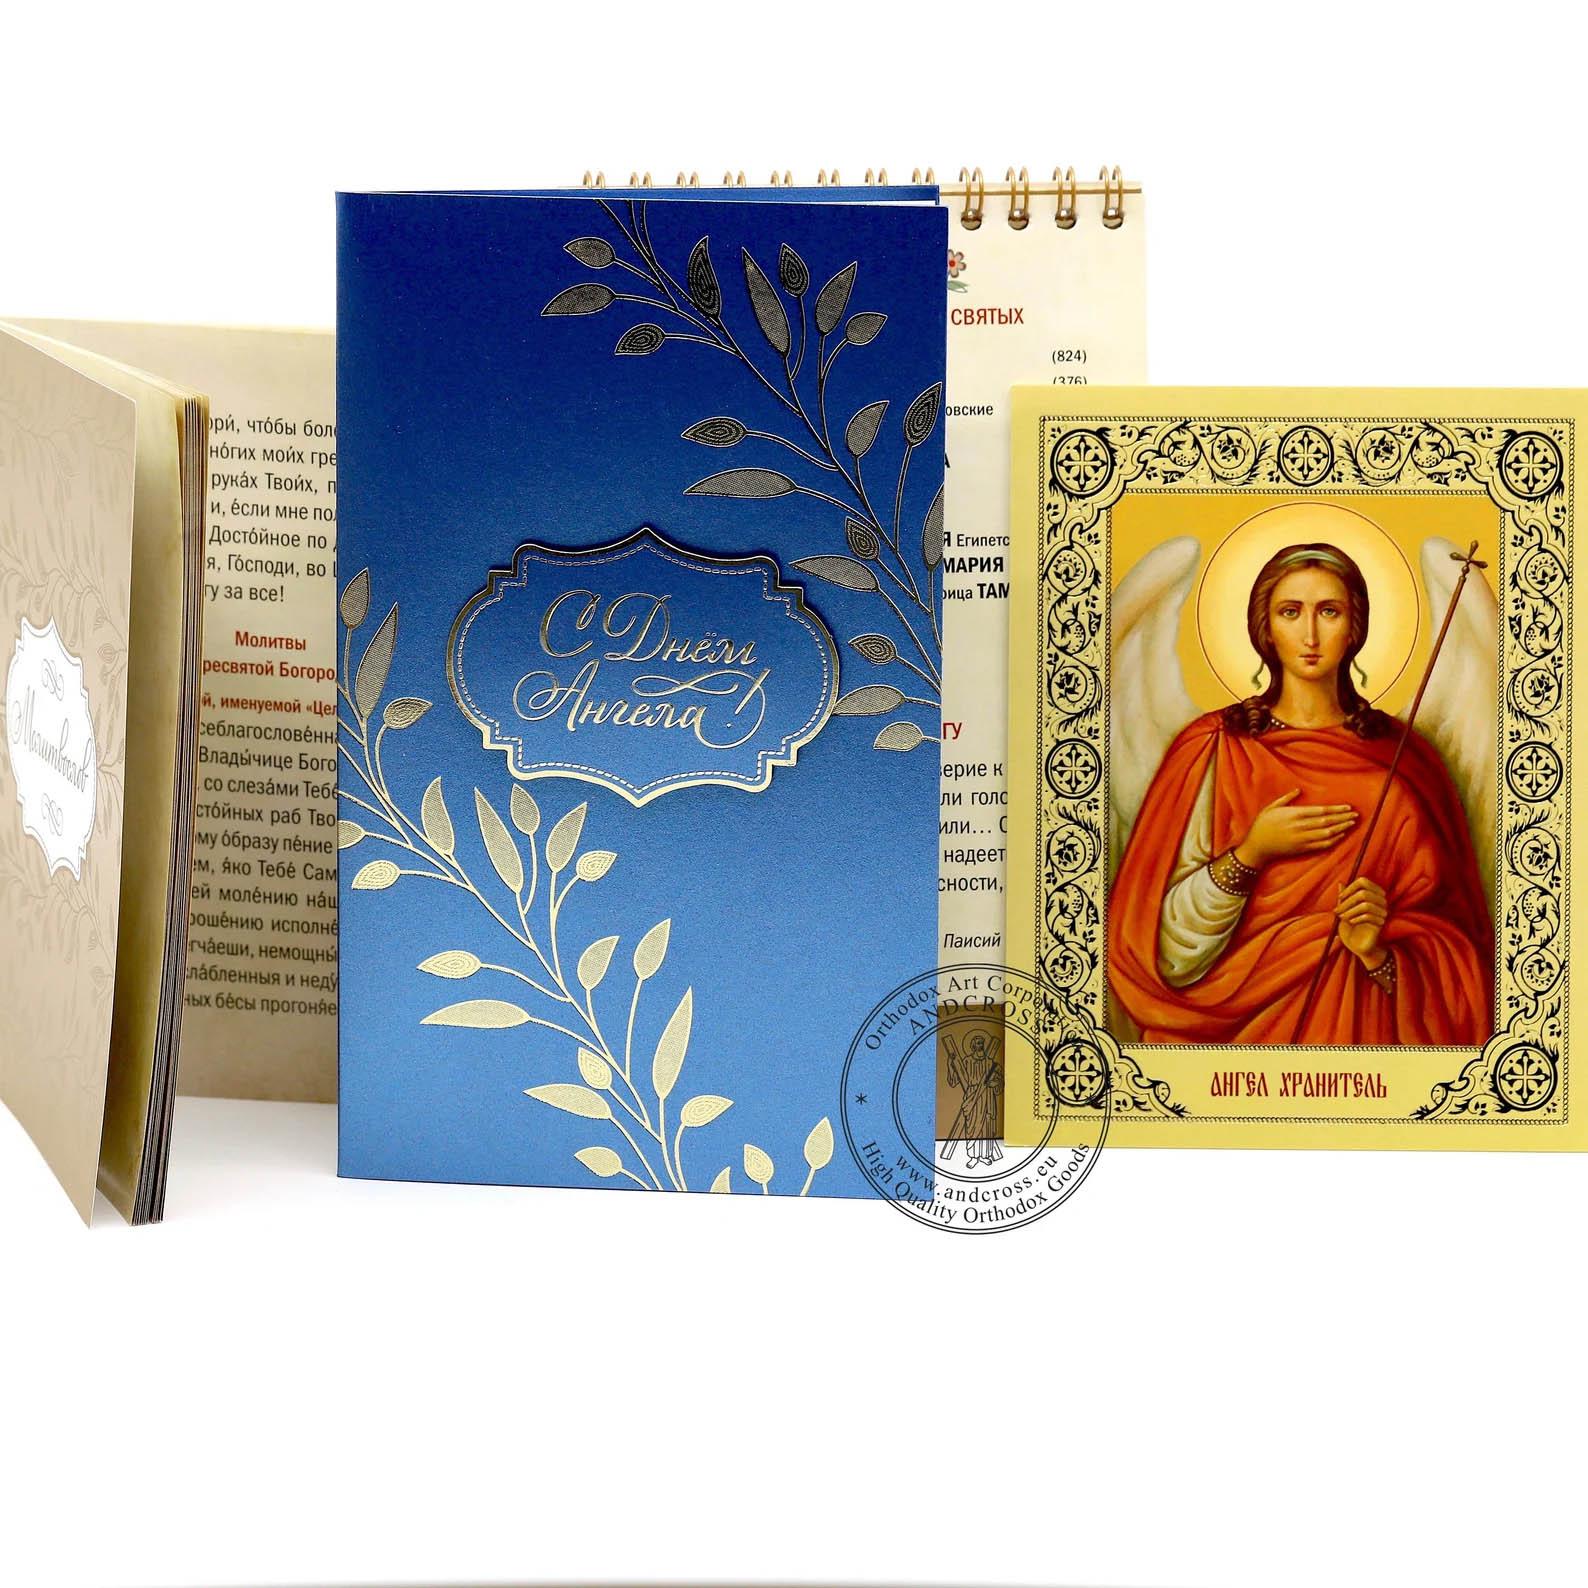 Happy Guardian Angel Day The gift set